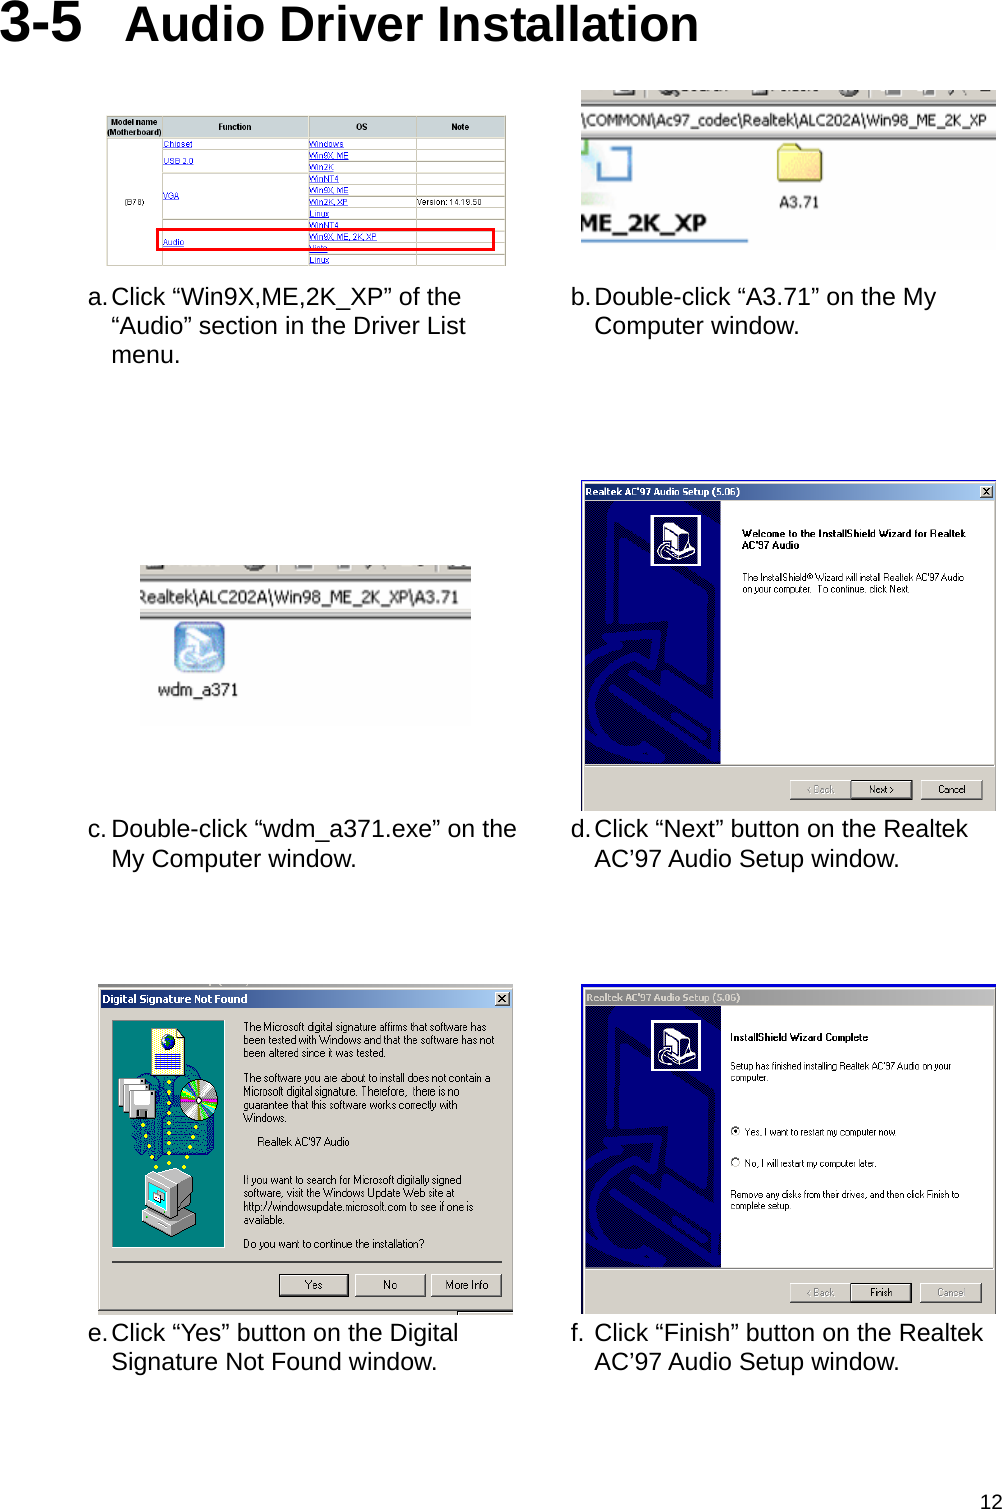  123-5  Audio Driver Installation    a. Click “Win9X,ME,2K_XP” of the “Audio” section in the Driver List menu. b. Double-click “A3.71” on the My Computer window.      c. Double-click “wdm_a371.exe” on the My Computer window.  d. Click “Next” button on the Realtek AC’97 Audio Setup window.     e. Click “Yes” button on the Digital Signature Not Found window.  f. Click “Finish” button on the Realtek AC’97 Audio Setup window. 